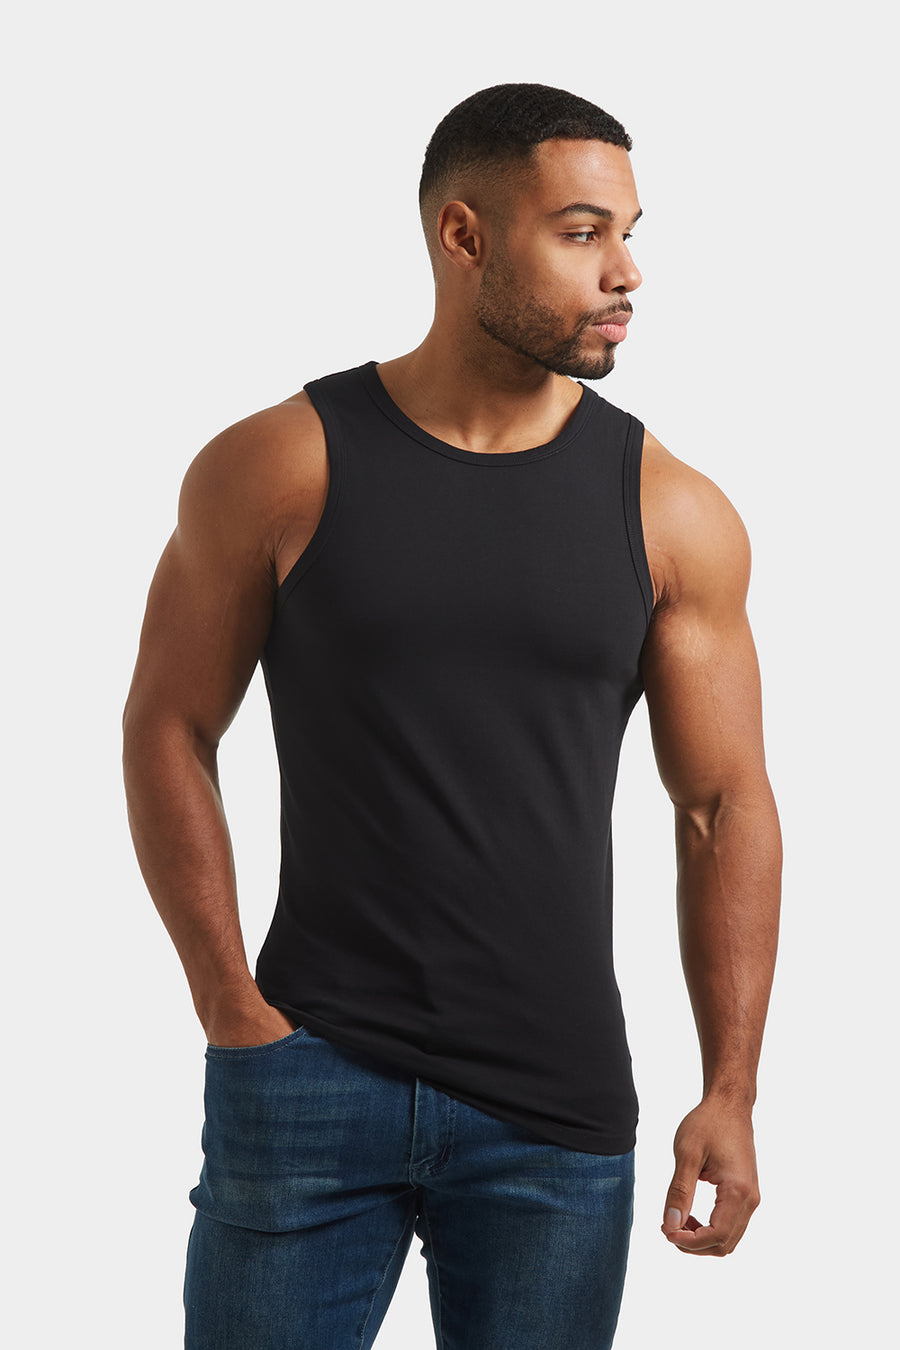 URYY Men's Deep V-Neck T Shirt for Gym Workout Athletic Sport Sexy T-Shirts  for Men Black at  Men's Clothing store